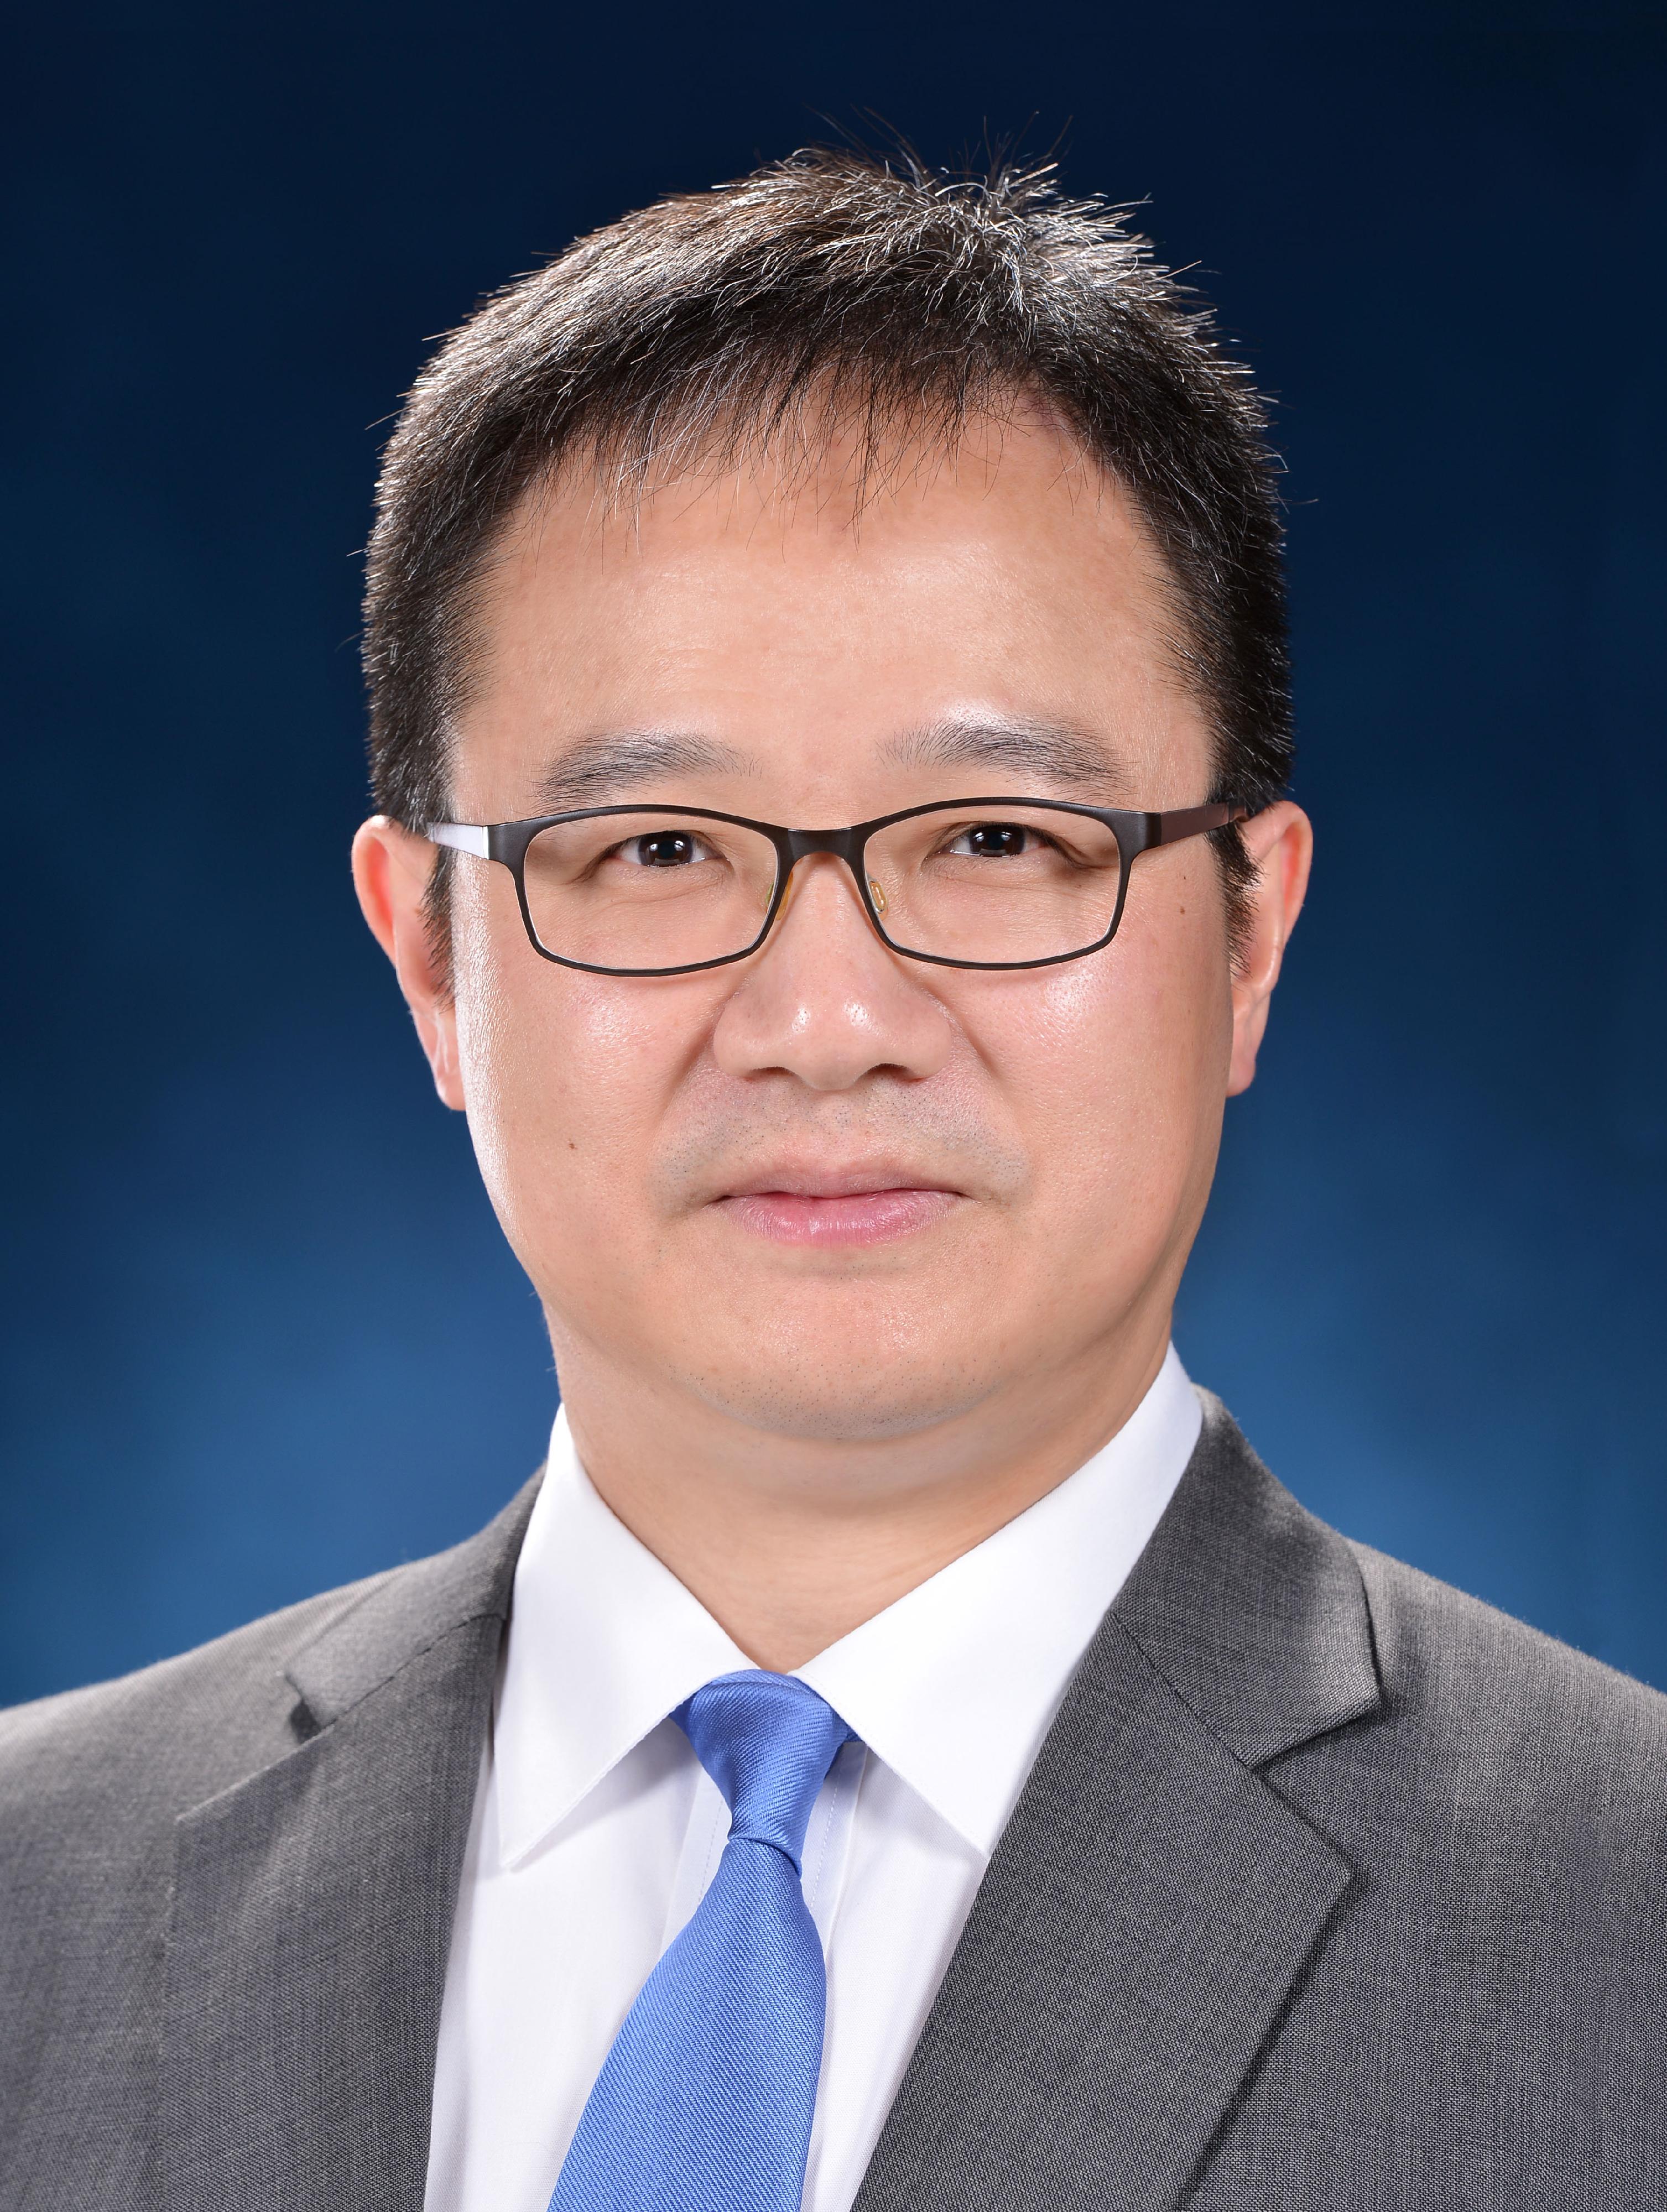 Mr Joe Wong Chi-cho, Permanent Secretary for Home Affairs, will assume the post of Permanent Secretary for Culture, Sports and Tourism on July 1, 2022.